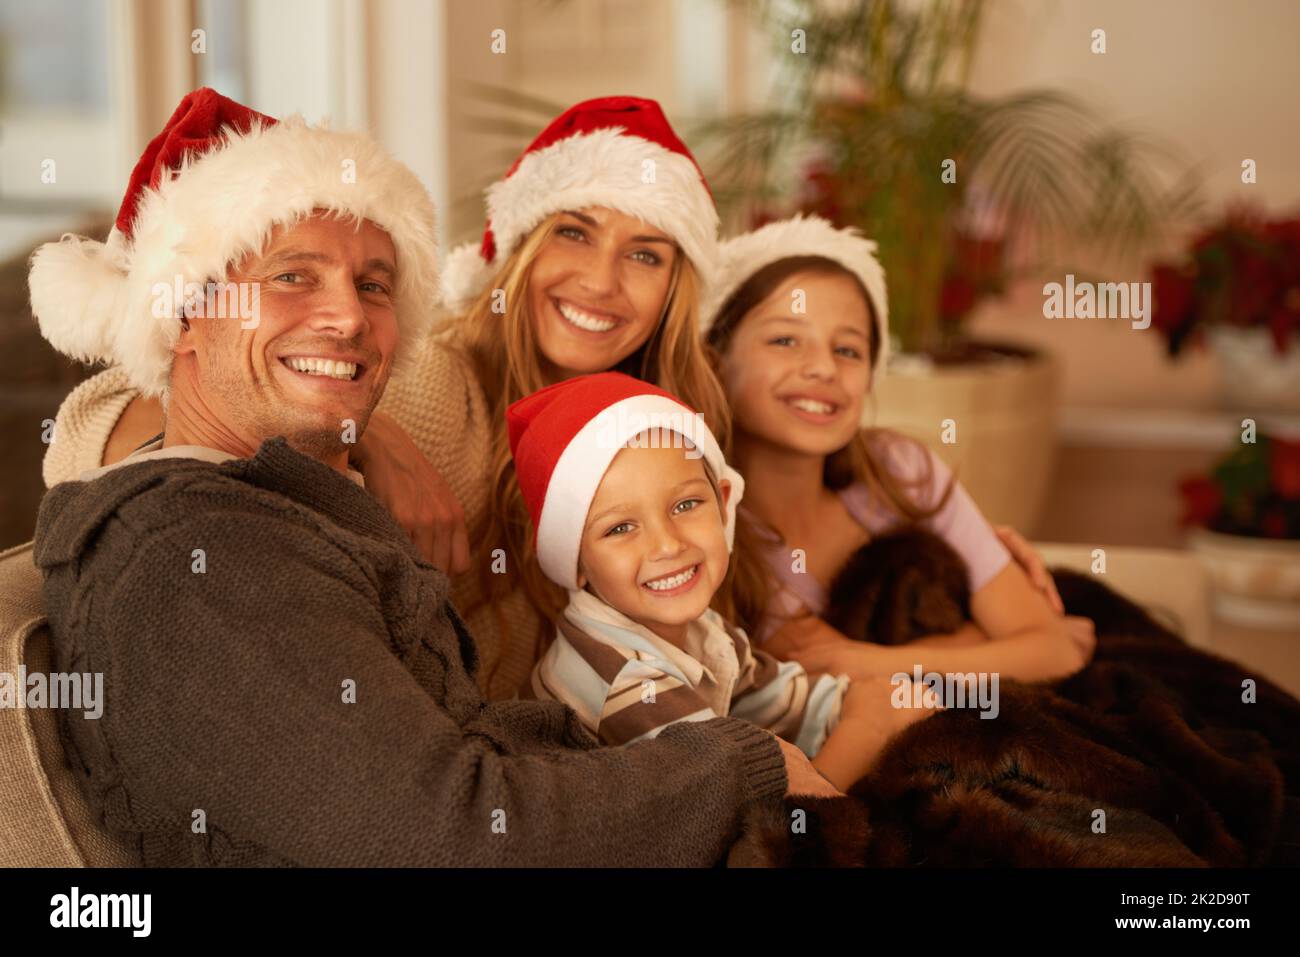 Family moments at Christmas time. Portrait of a happy young family on Christmas day. Stock Photo